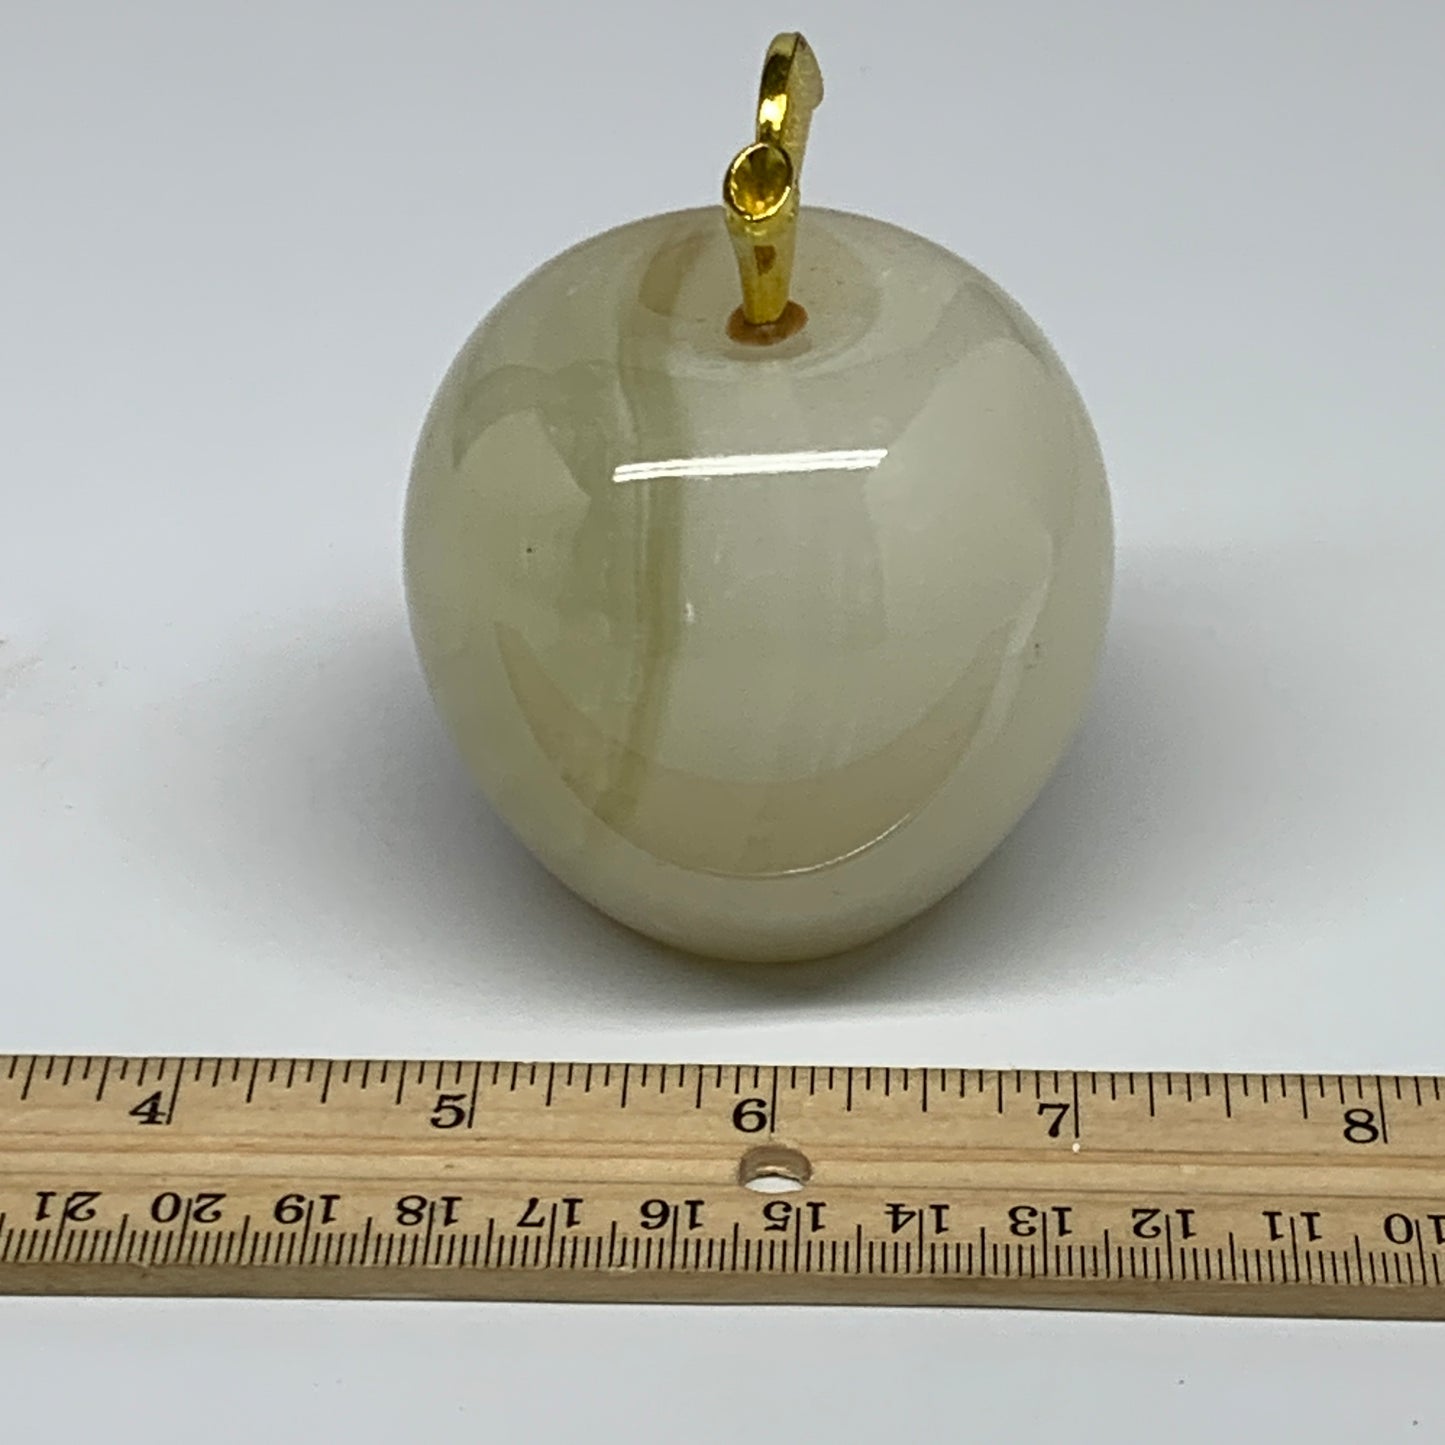 375g, 2.3"x2.4" Natural Green Onyx Apple Gemstone from Afghanistan, B31989